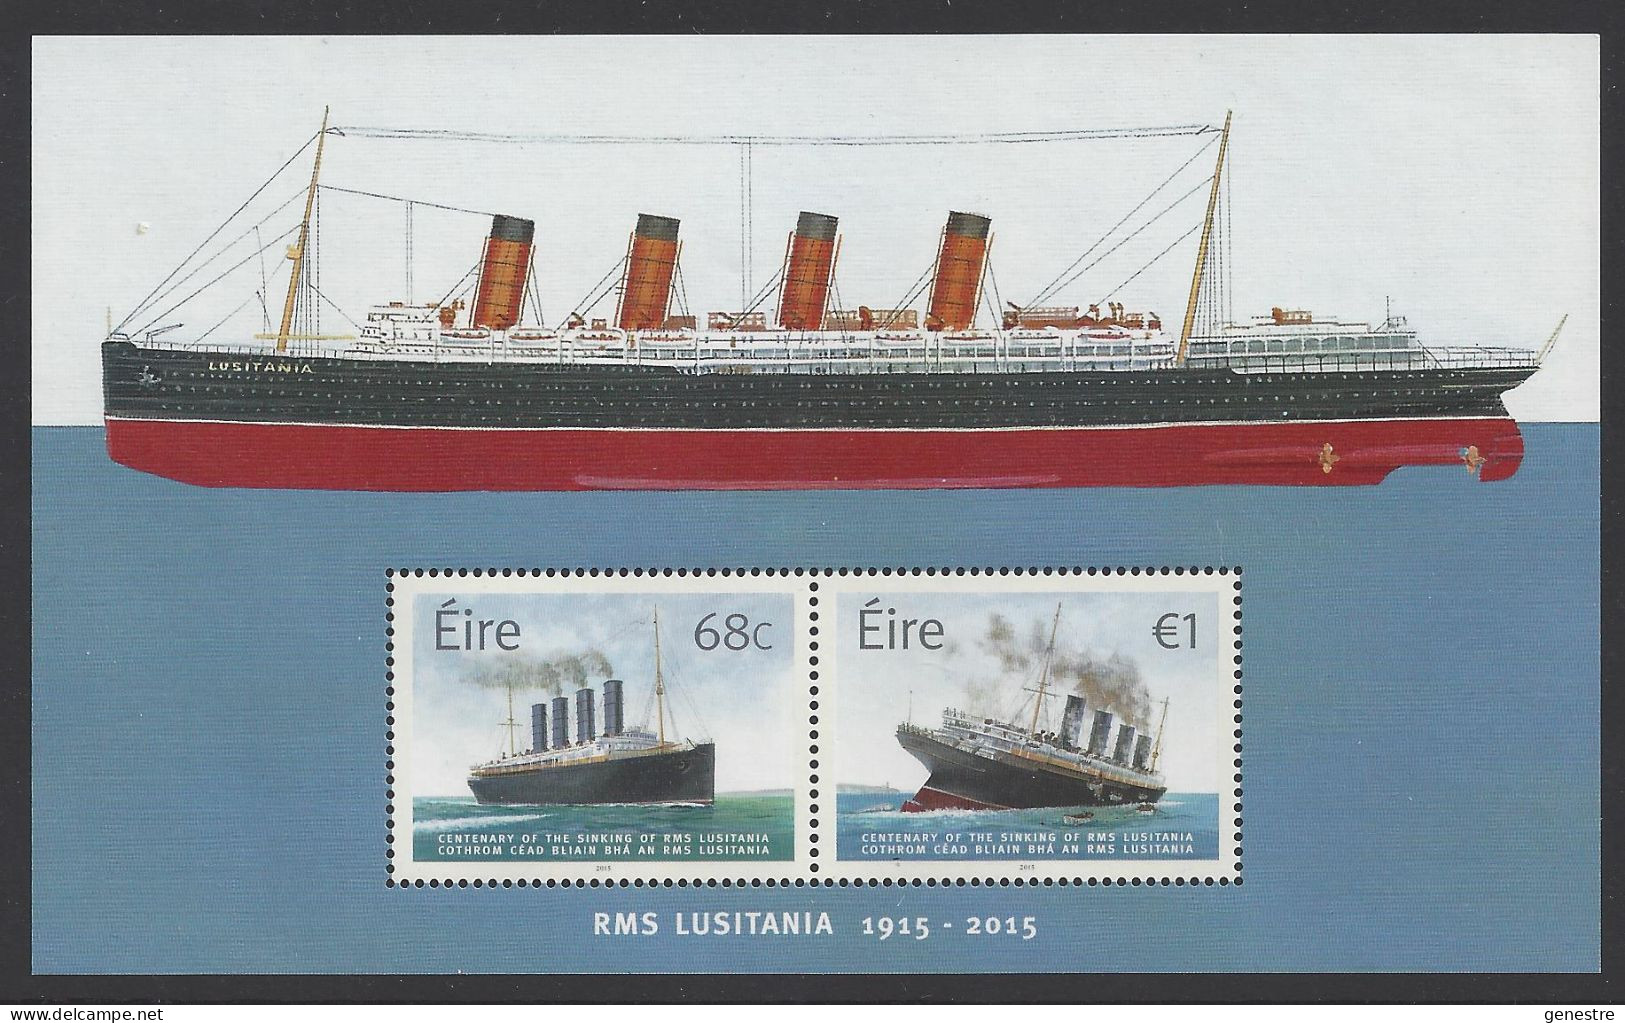 Irlande / Eire 2015 - "Centenary Of The World War I / The Loss Of RMS LUSITANIA" - Blocks & Sheetlets